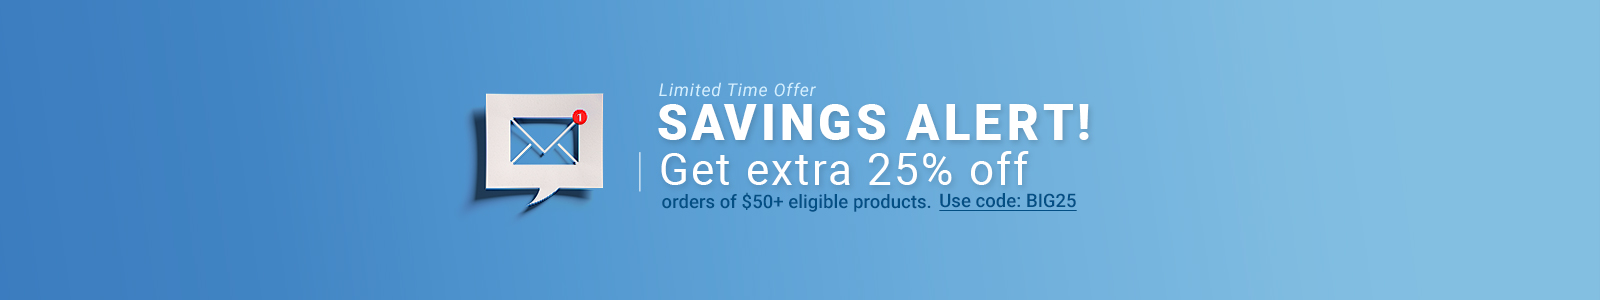 Savings Alert!
Get extra 25% off orders of $50+ eligible products
Use code:  BIG25
Limited Time Offer
Shop Now